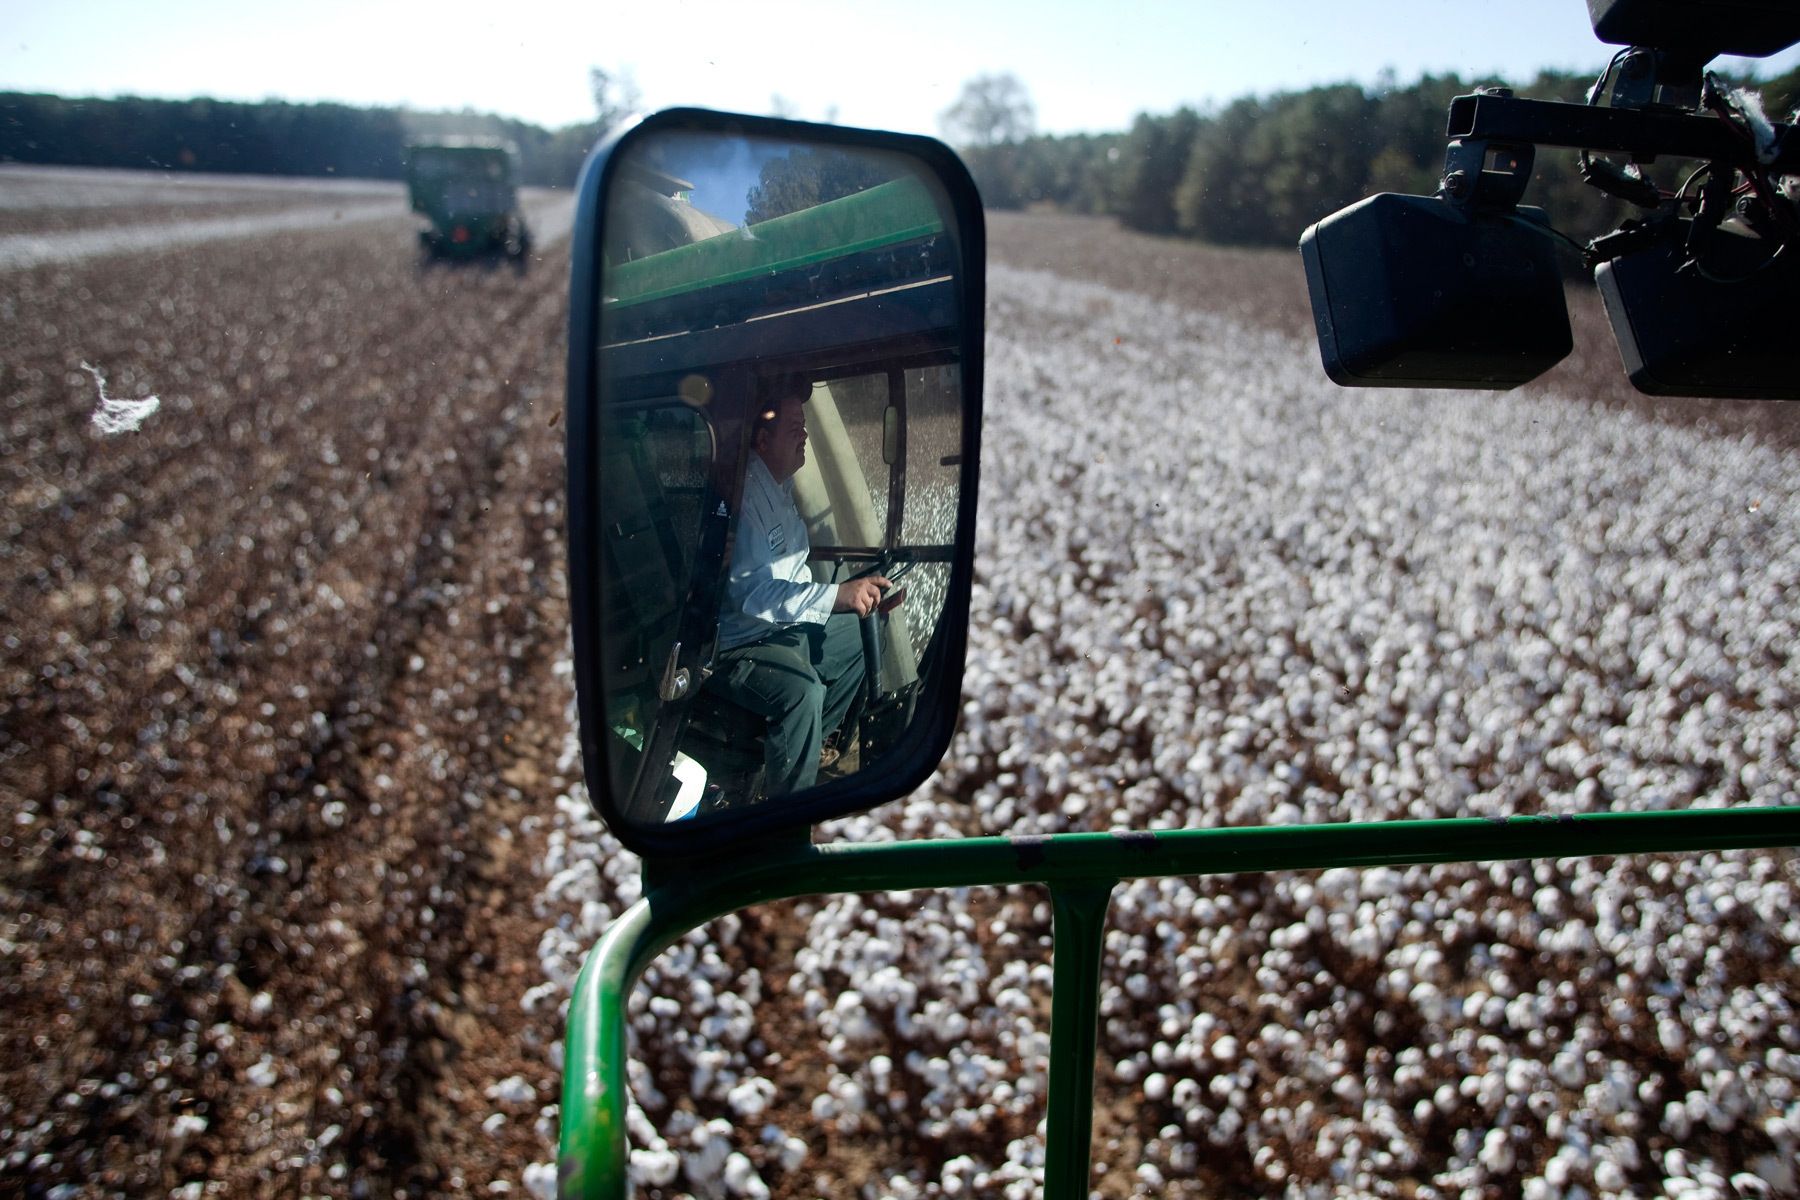 Operator James Grooms is reflected in the mirror of a cotton picker at Baxley & Baxley Farms in Minturn, South Carolina November 24, 2012. The third generation farm, located along South Carolina's cotton corridor, harvested just under 1100 acres of cotton this season. The Baxley family plants several crops but cotton is the cash crop and the most profitable.    REUTERS/Randall Hill (UNITED STATES)